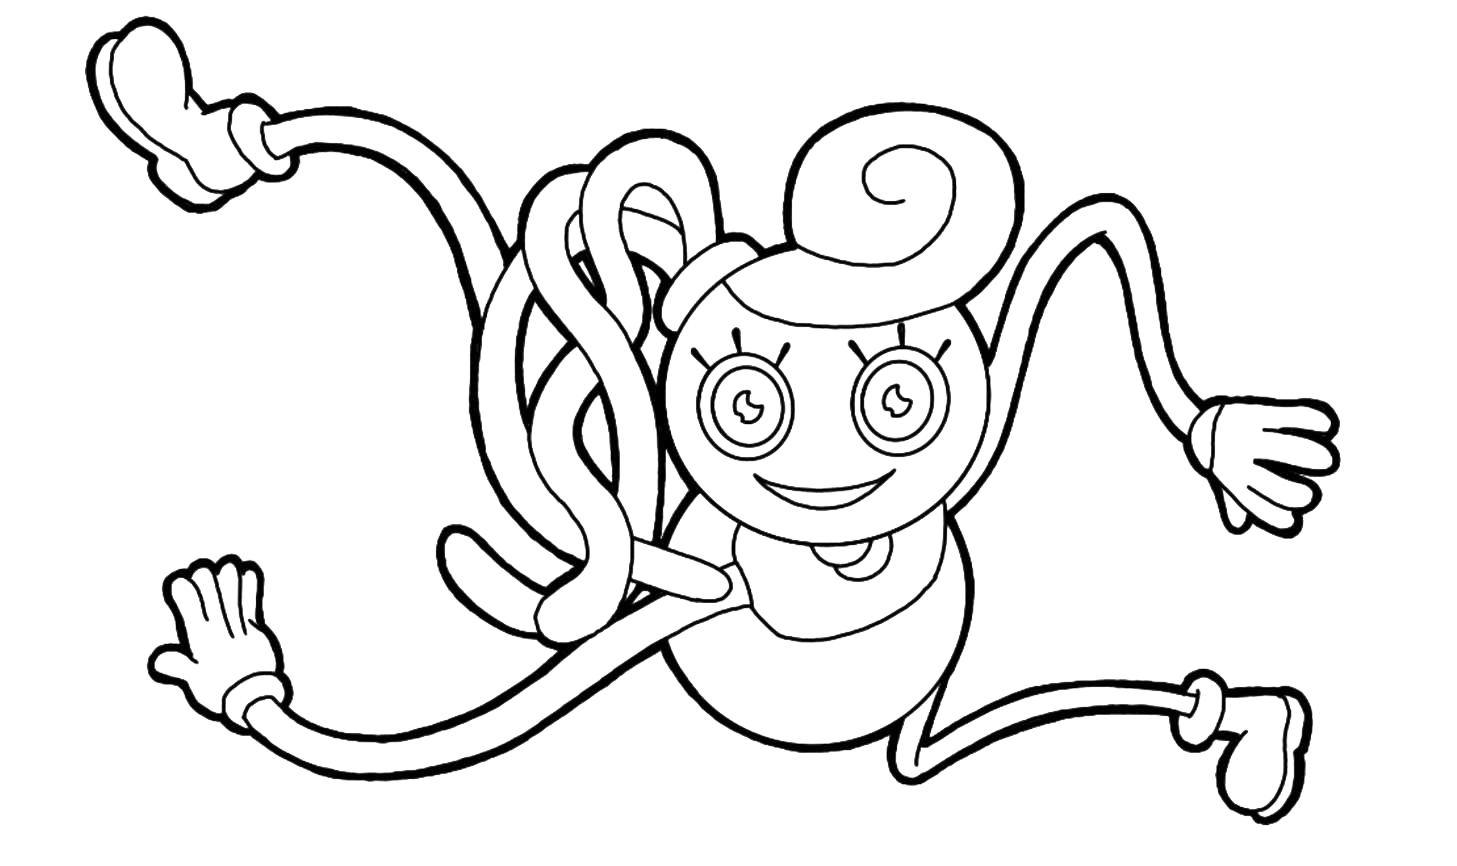 Mommy long legs coloring pages